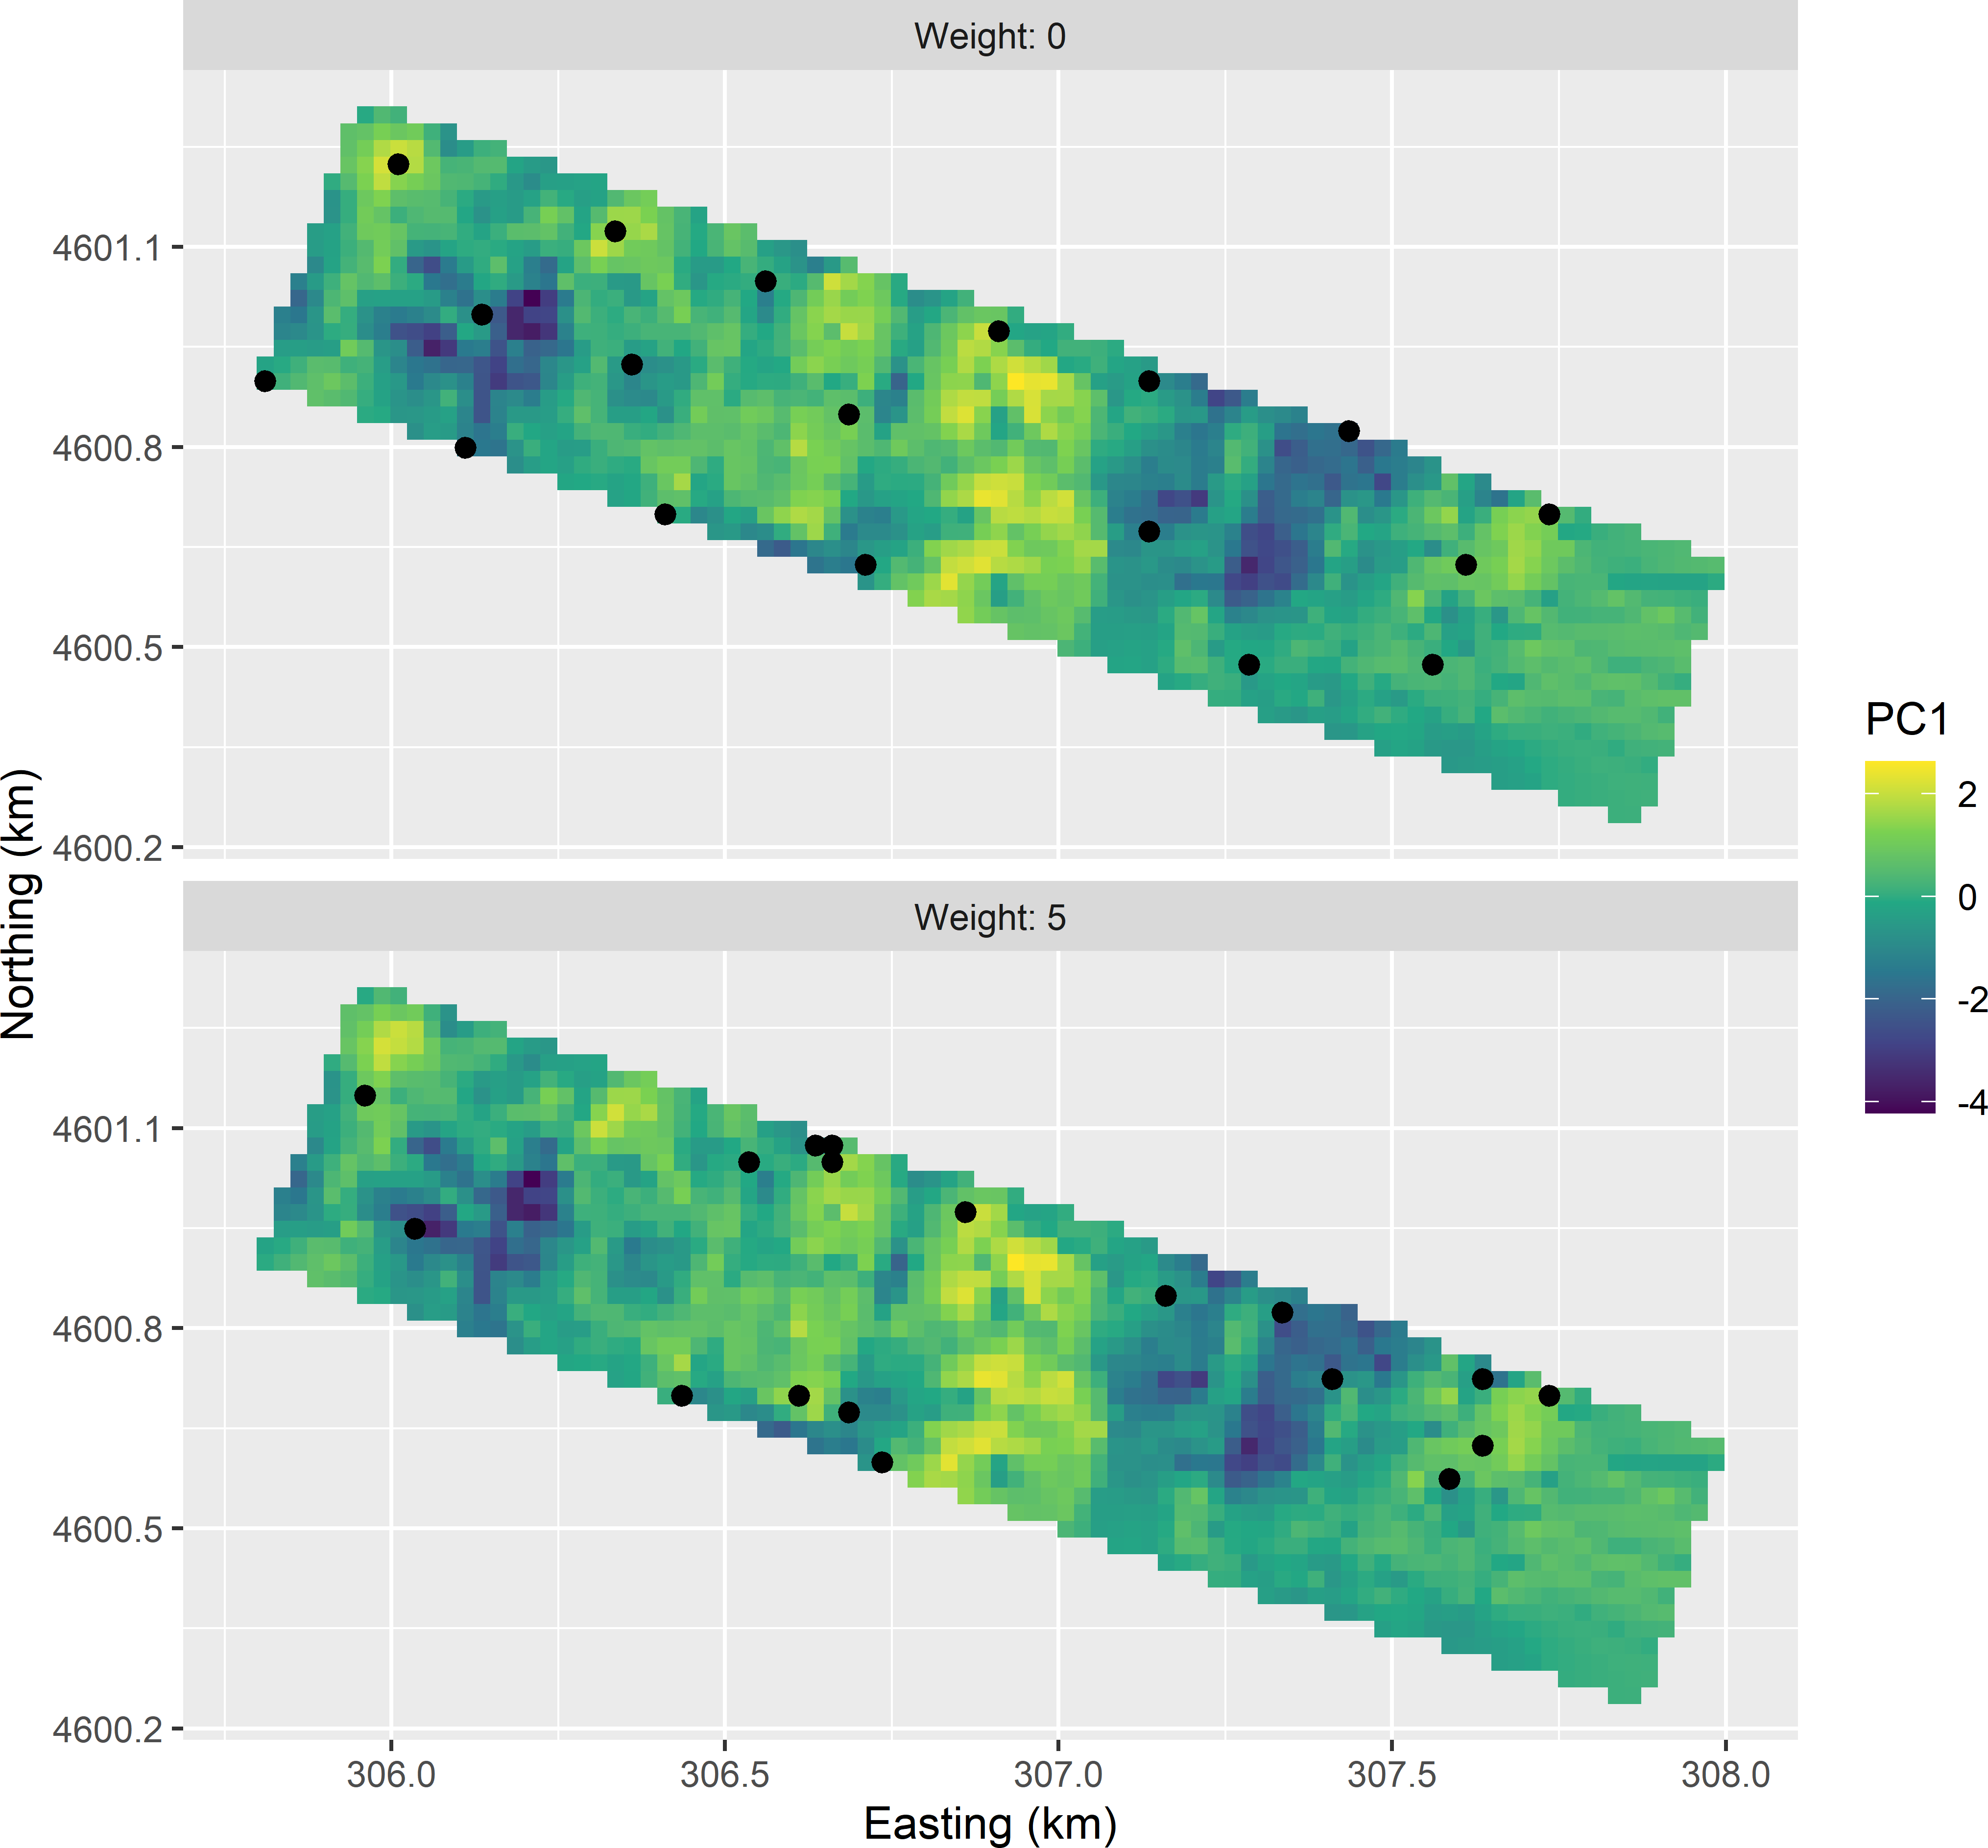 Stratified CCRSD samples from the Cotton Research Farm, optimised with the model-based criterion, obtained without (weight = 0) and with penalty (weight = 5) for a large average distance to design points.